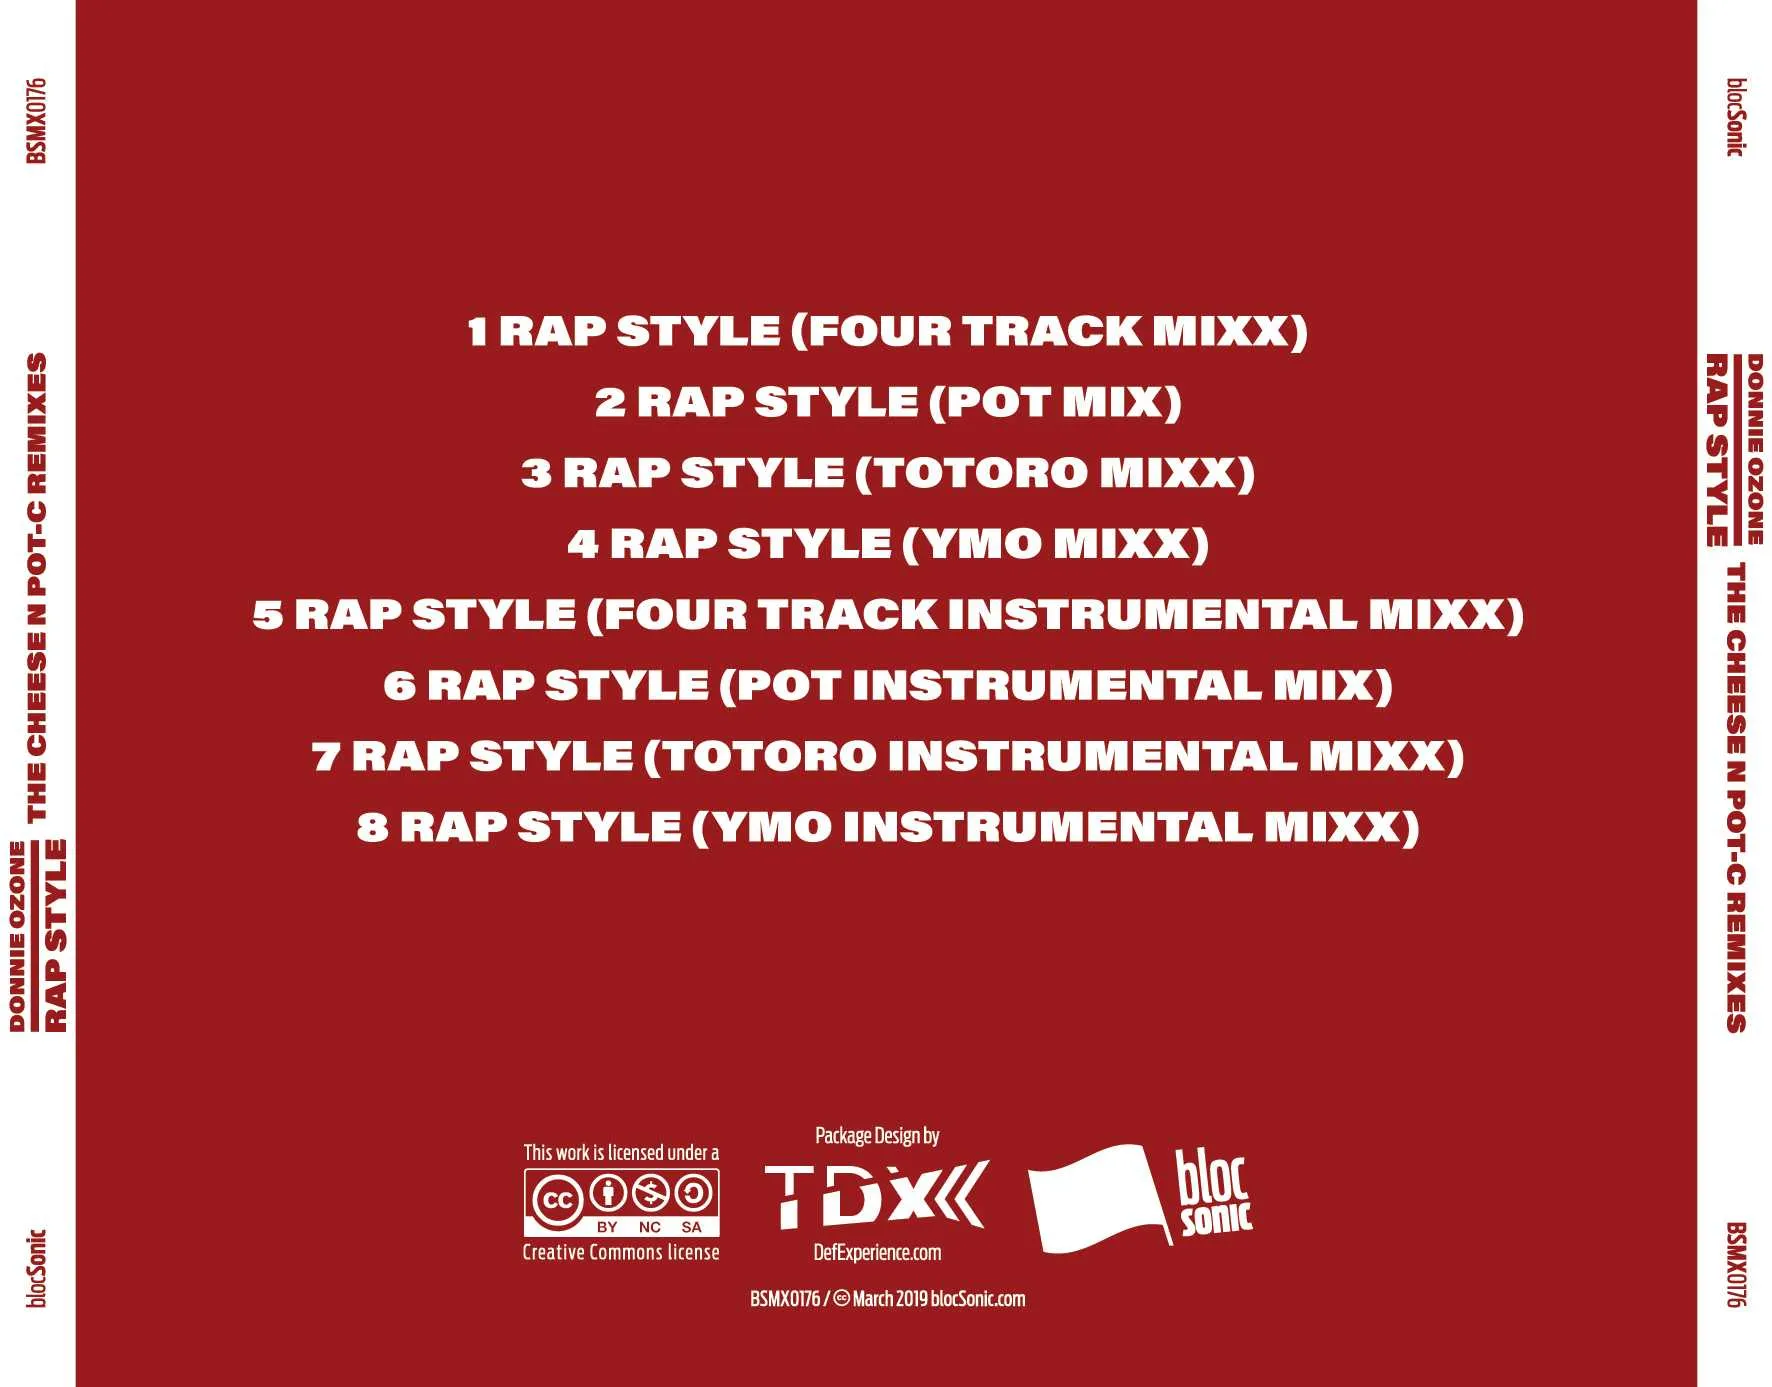 Album traycard for “Rap Style (The Cheese N Pot-C Remixes)” by Donnie Ozone